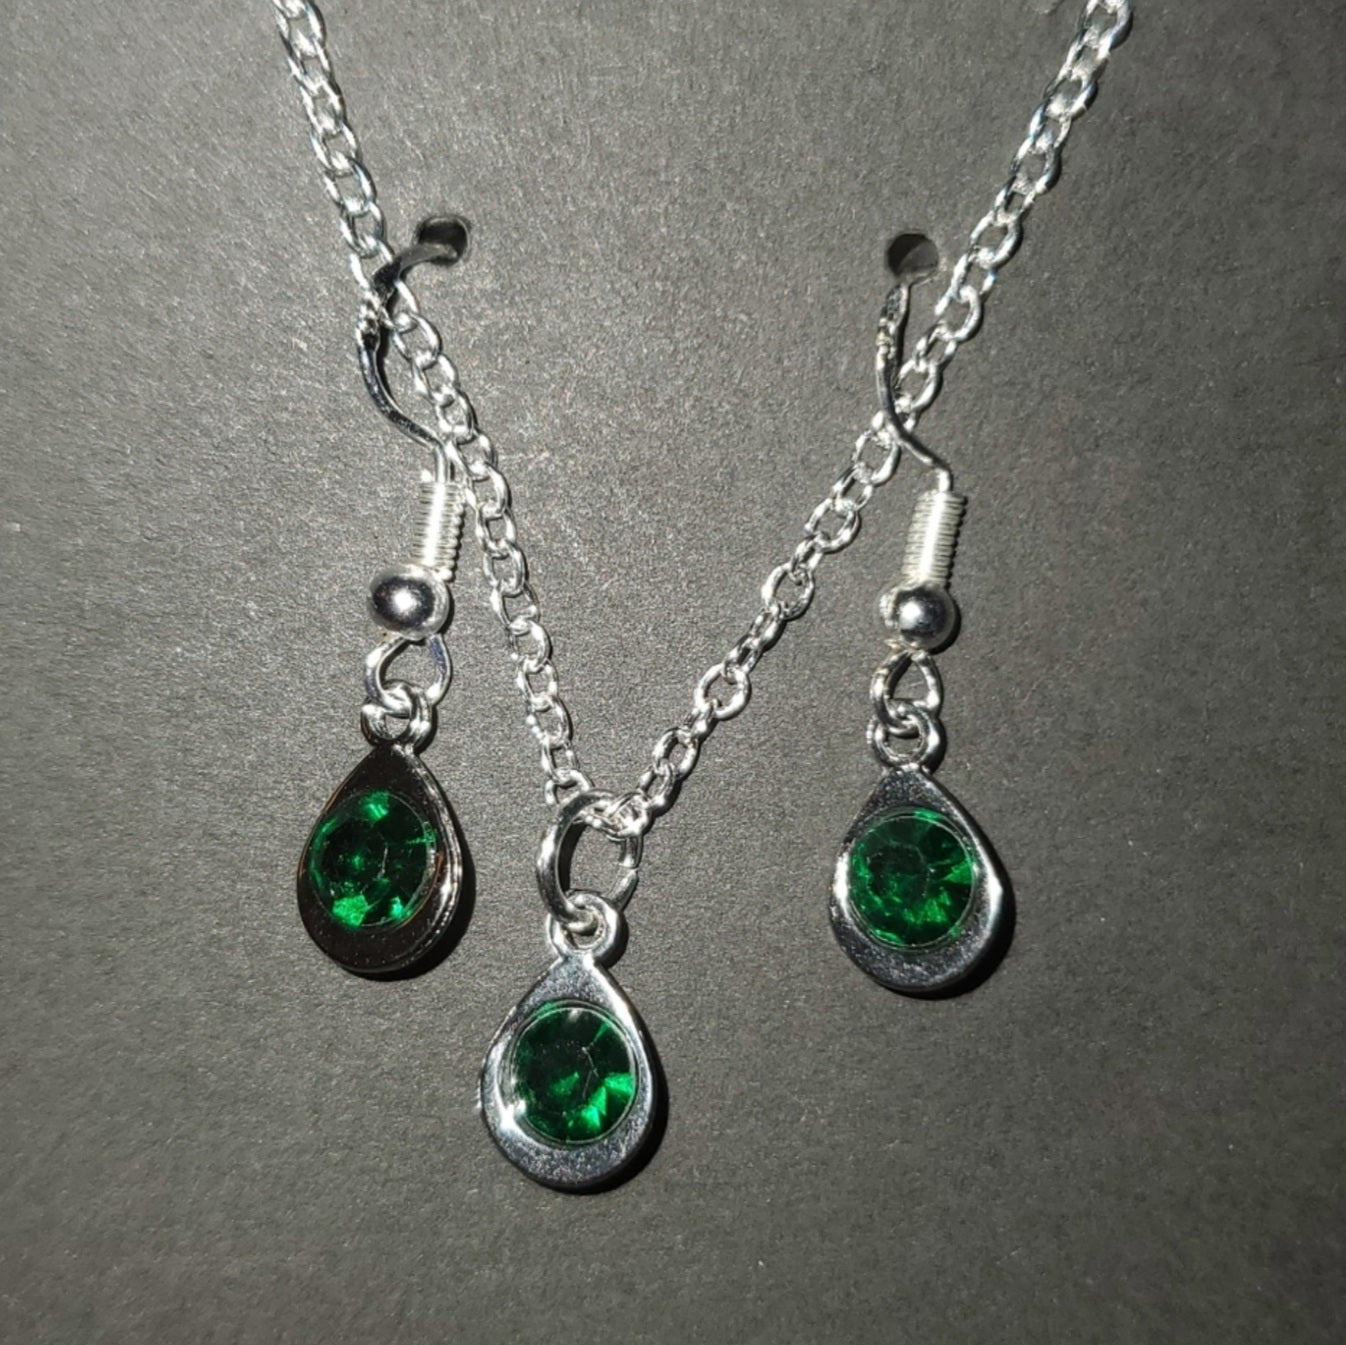 Birthstone Necklace & Earring Jewelry Sets- pick 1